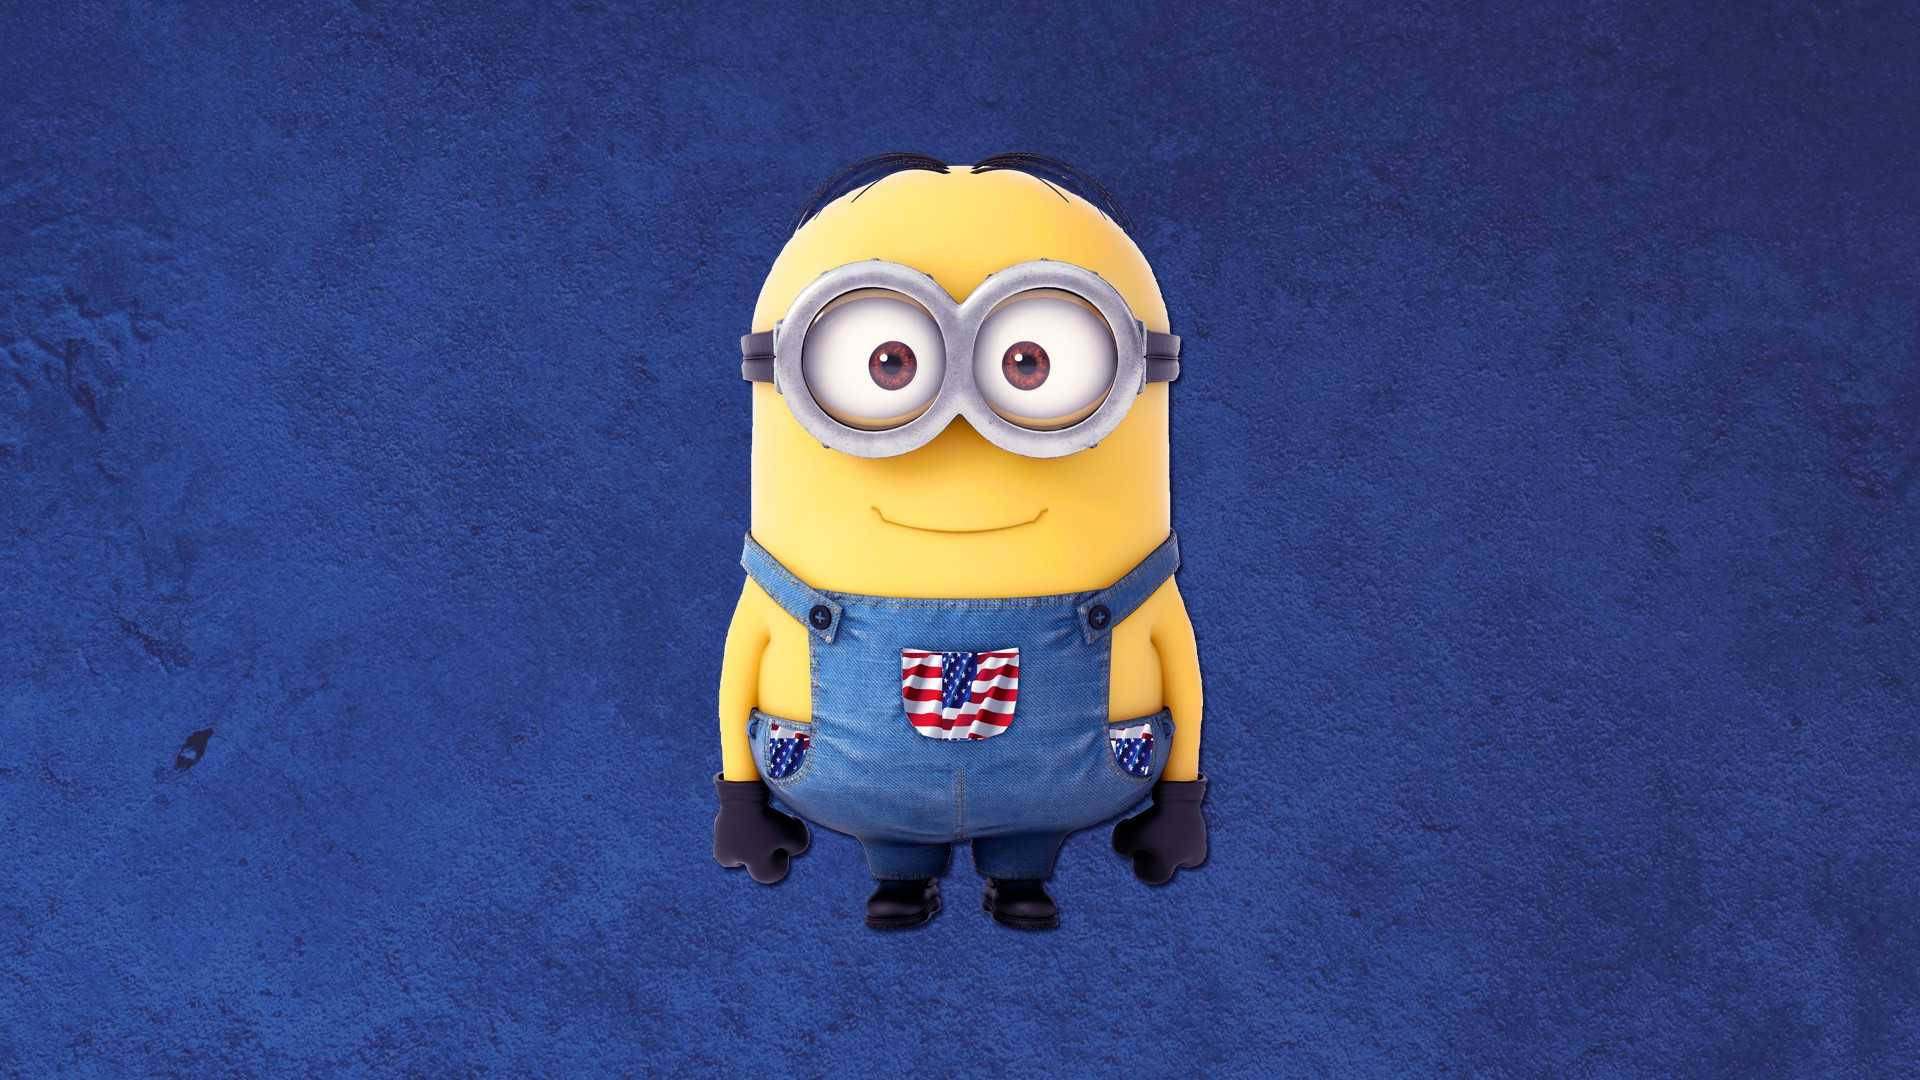 Minion Desktop In Overall With American Flag Background